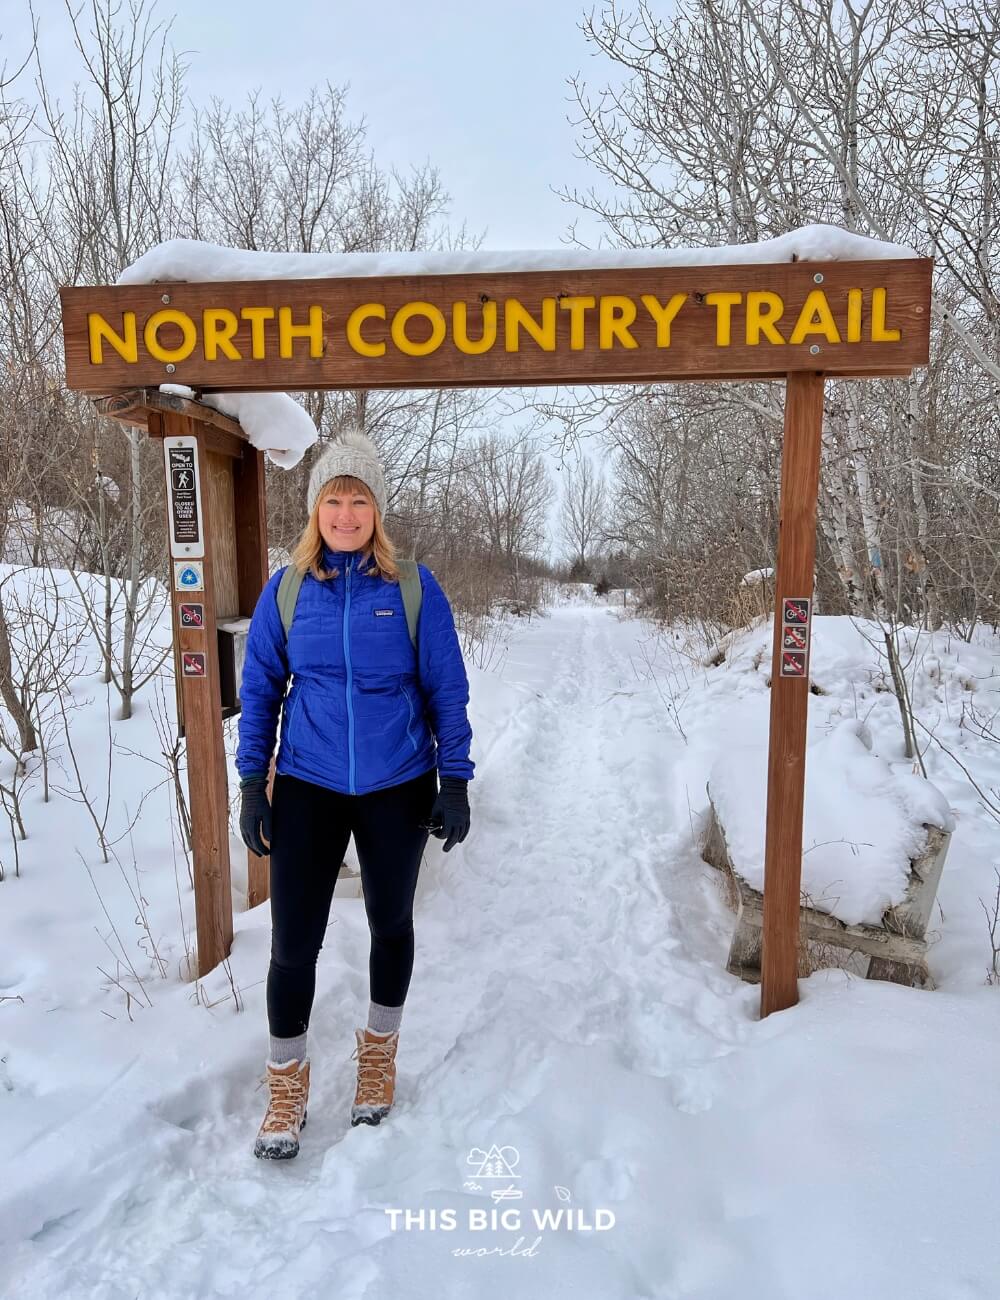 Me standing in front of the North Country Trail sign in Fergus Falls in winter.